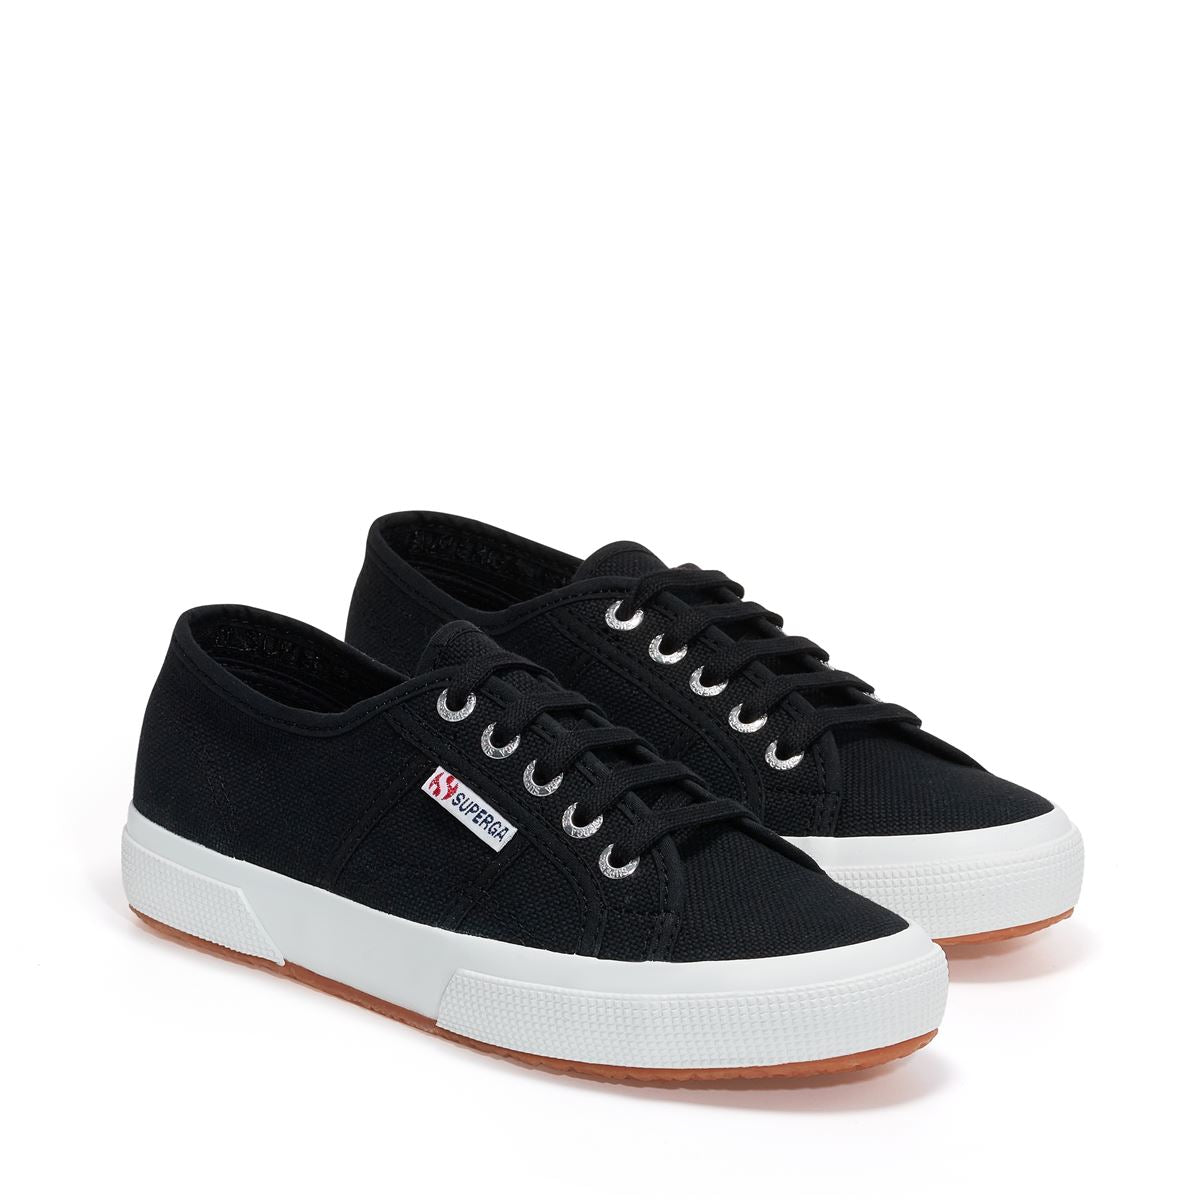 pair of navy canvas Superga shoes slight top angle